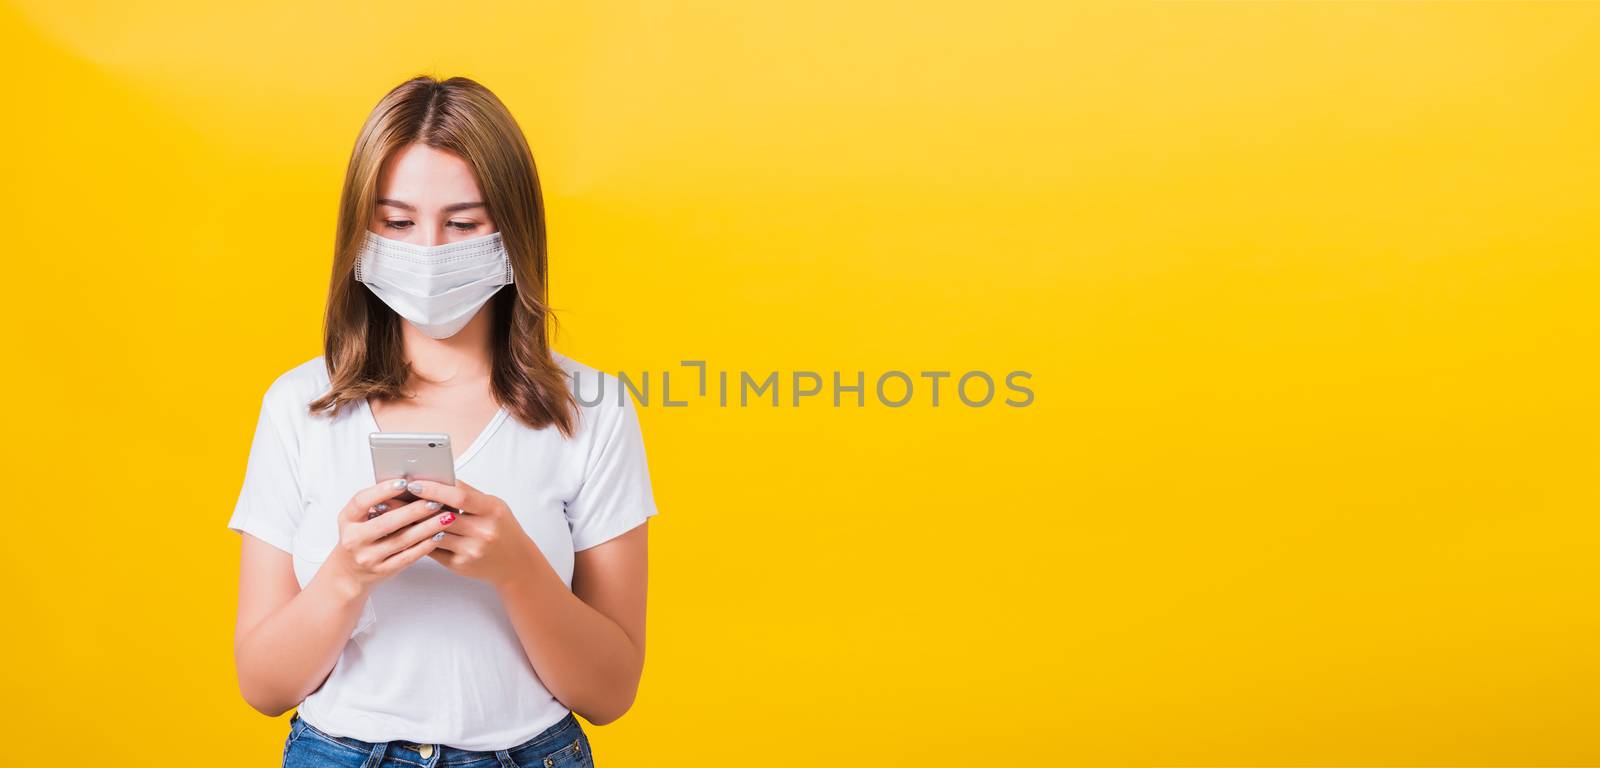 woman wearing mask protection, reading news update on smartphone by Sorapop